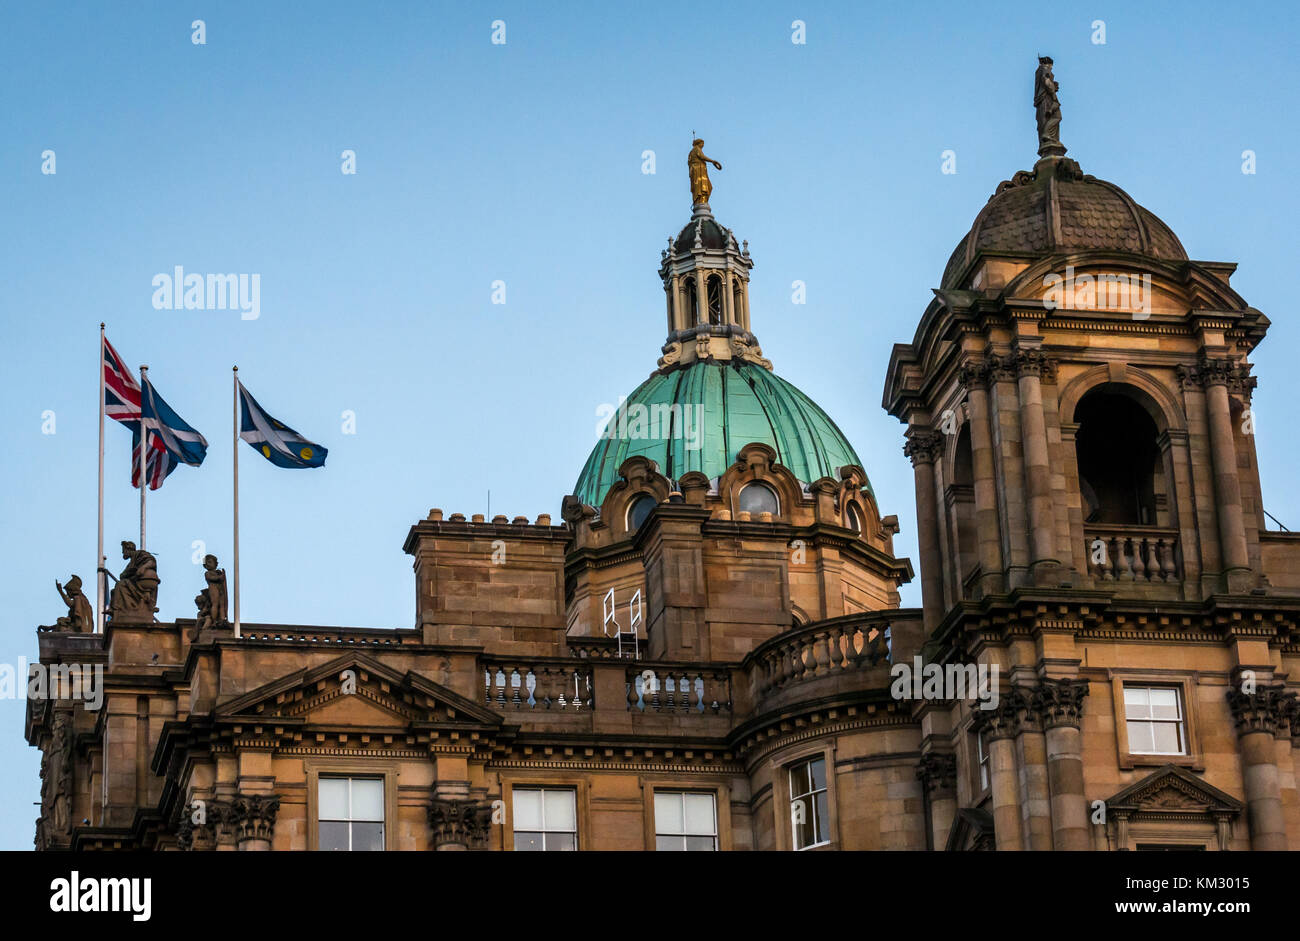 Roof of Bank of Scotland headquarters, The Mound, Edinburgh, UK, lit up at dusk with copper dome and flags flying against blue sky Stock Photo